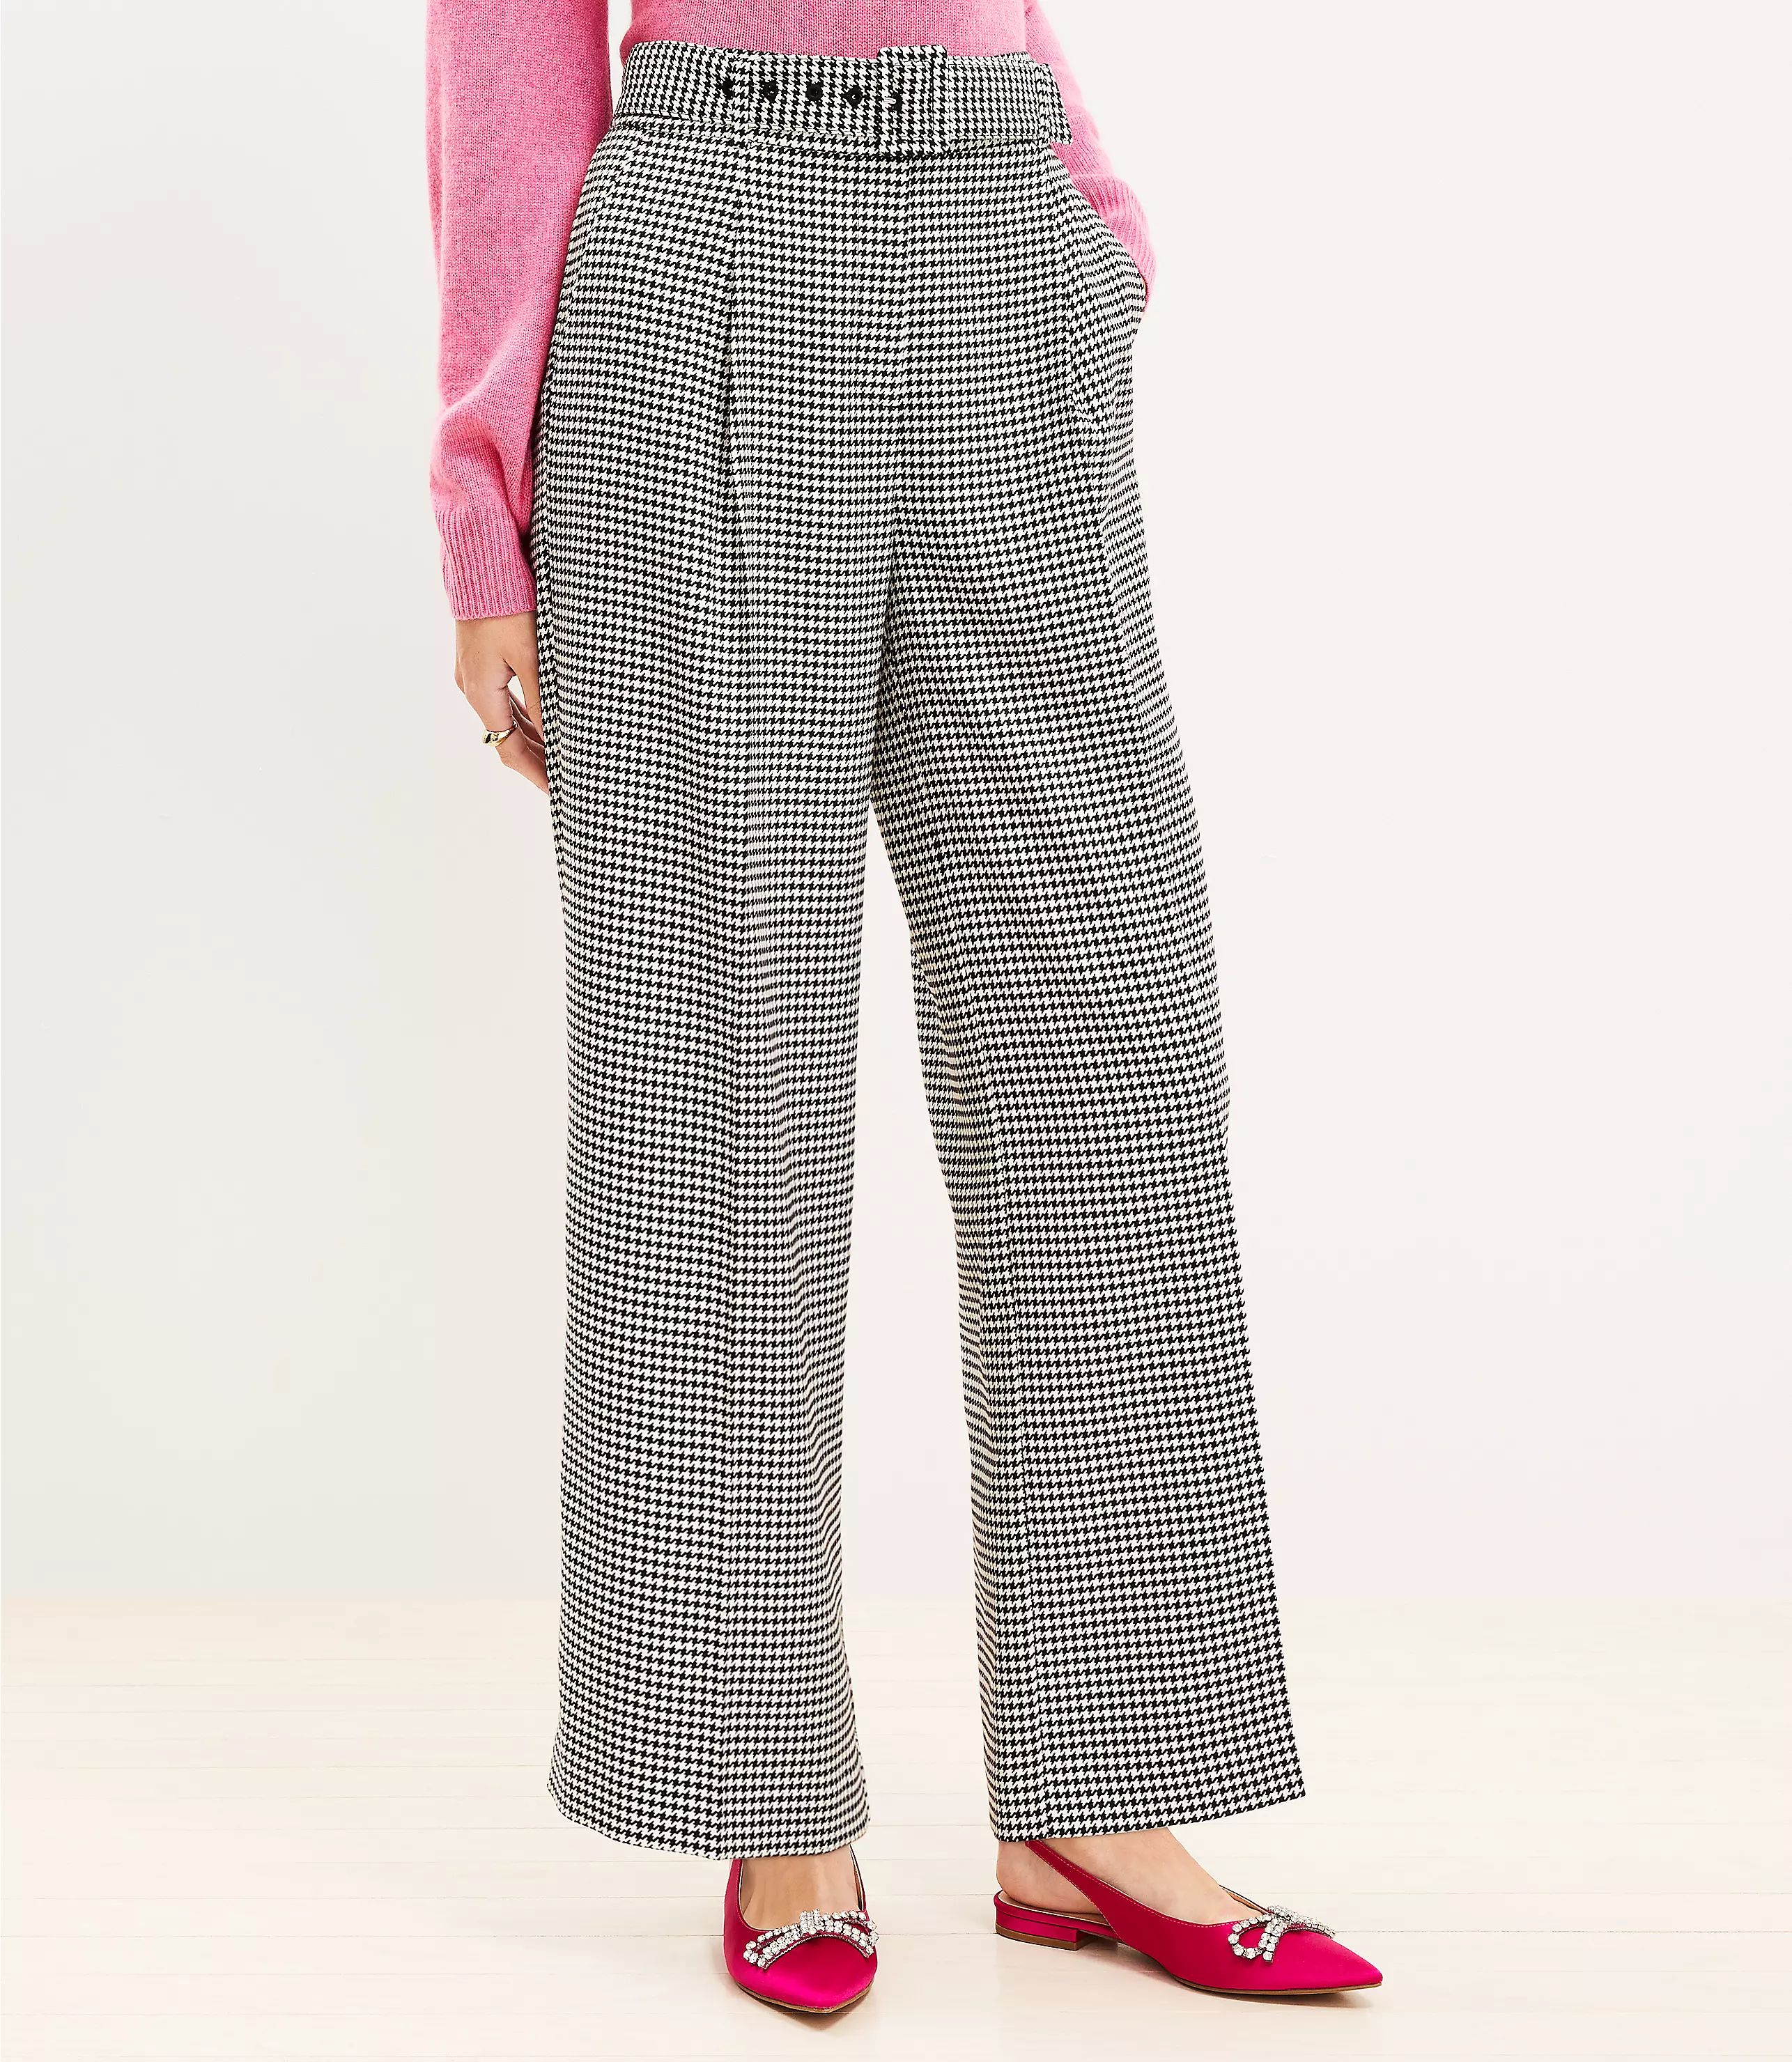 Petite Belted Wide Leg Pants in Houndstooth | LOFT